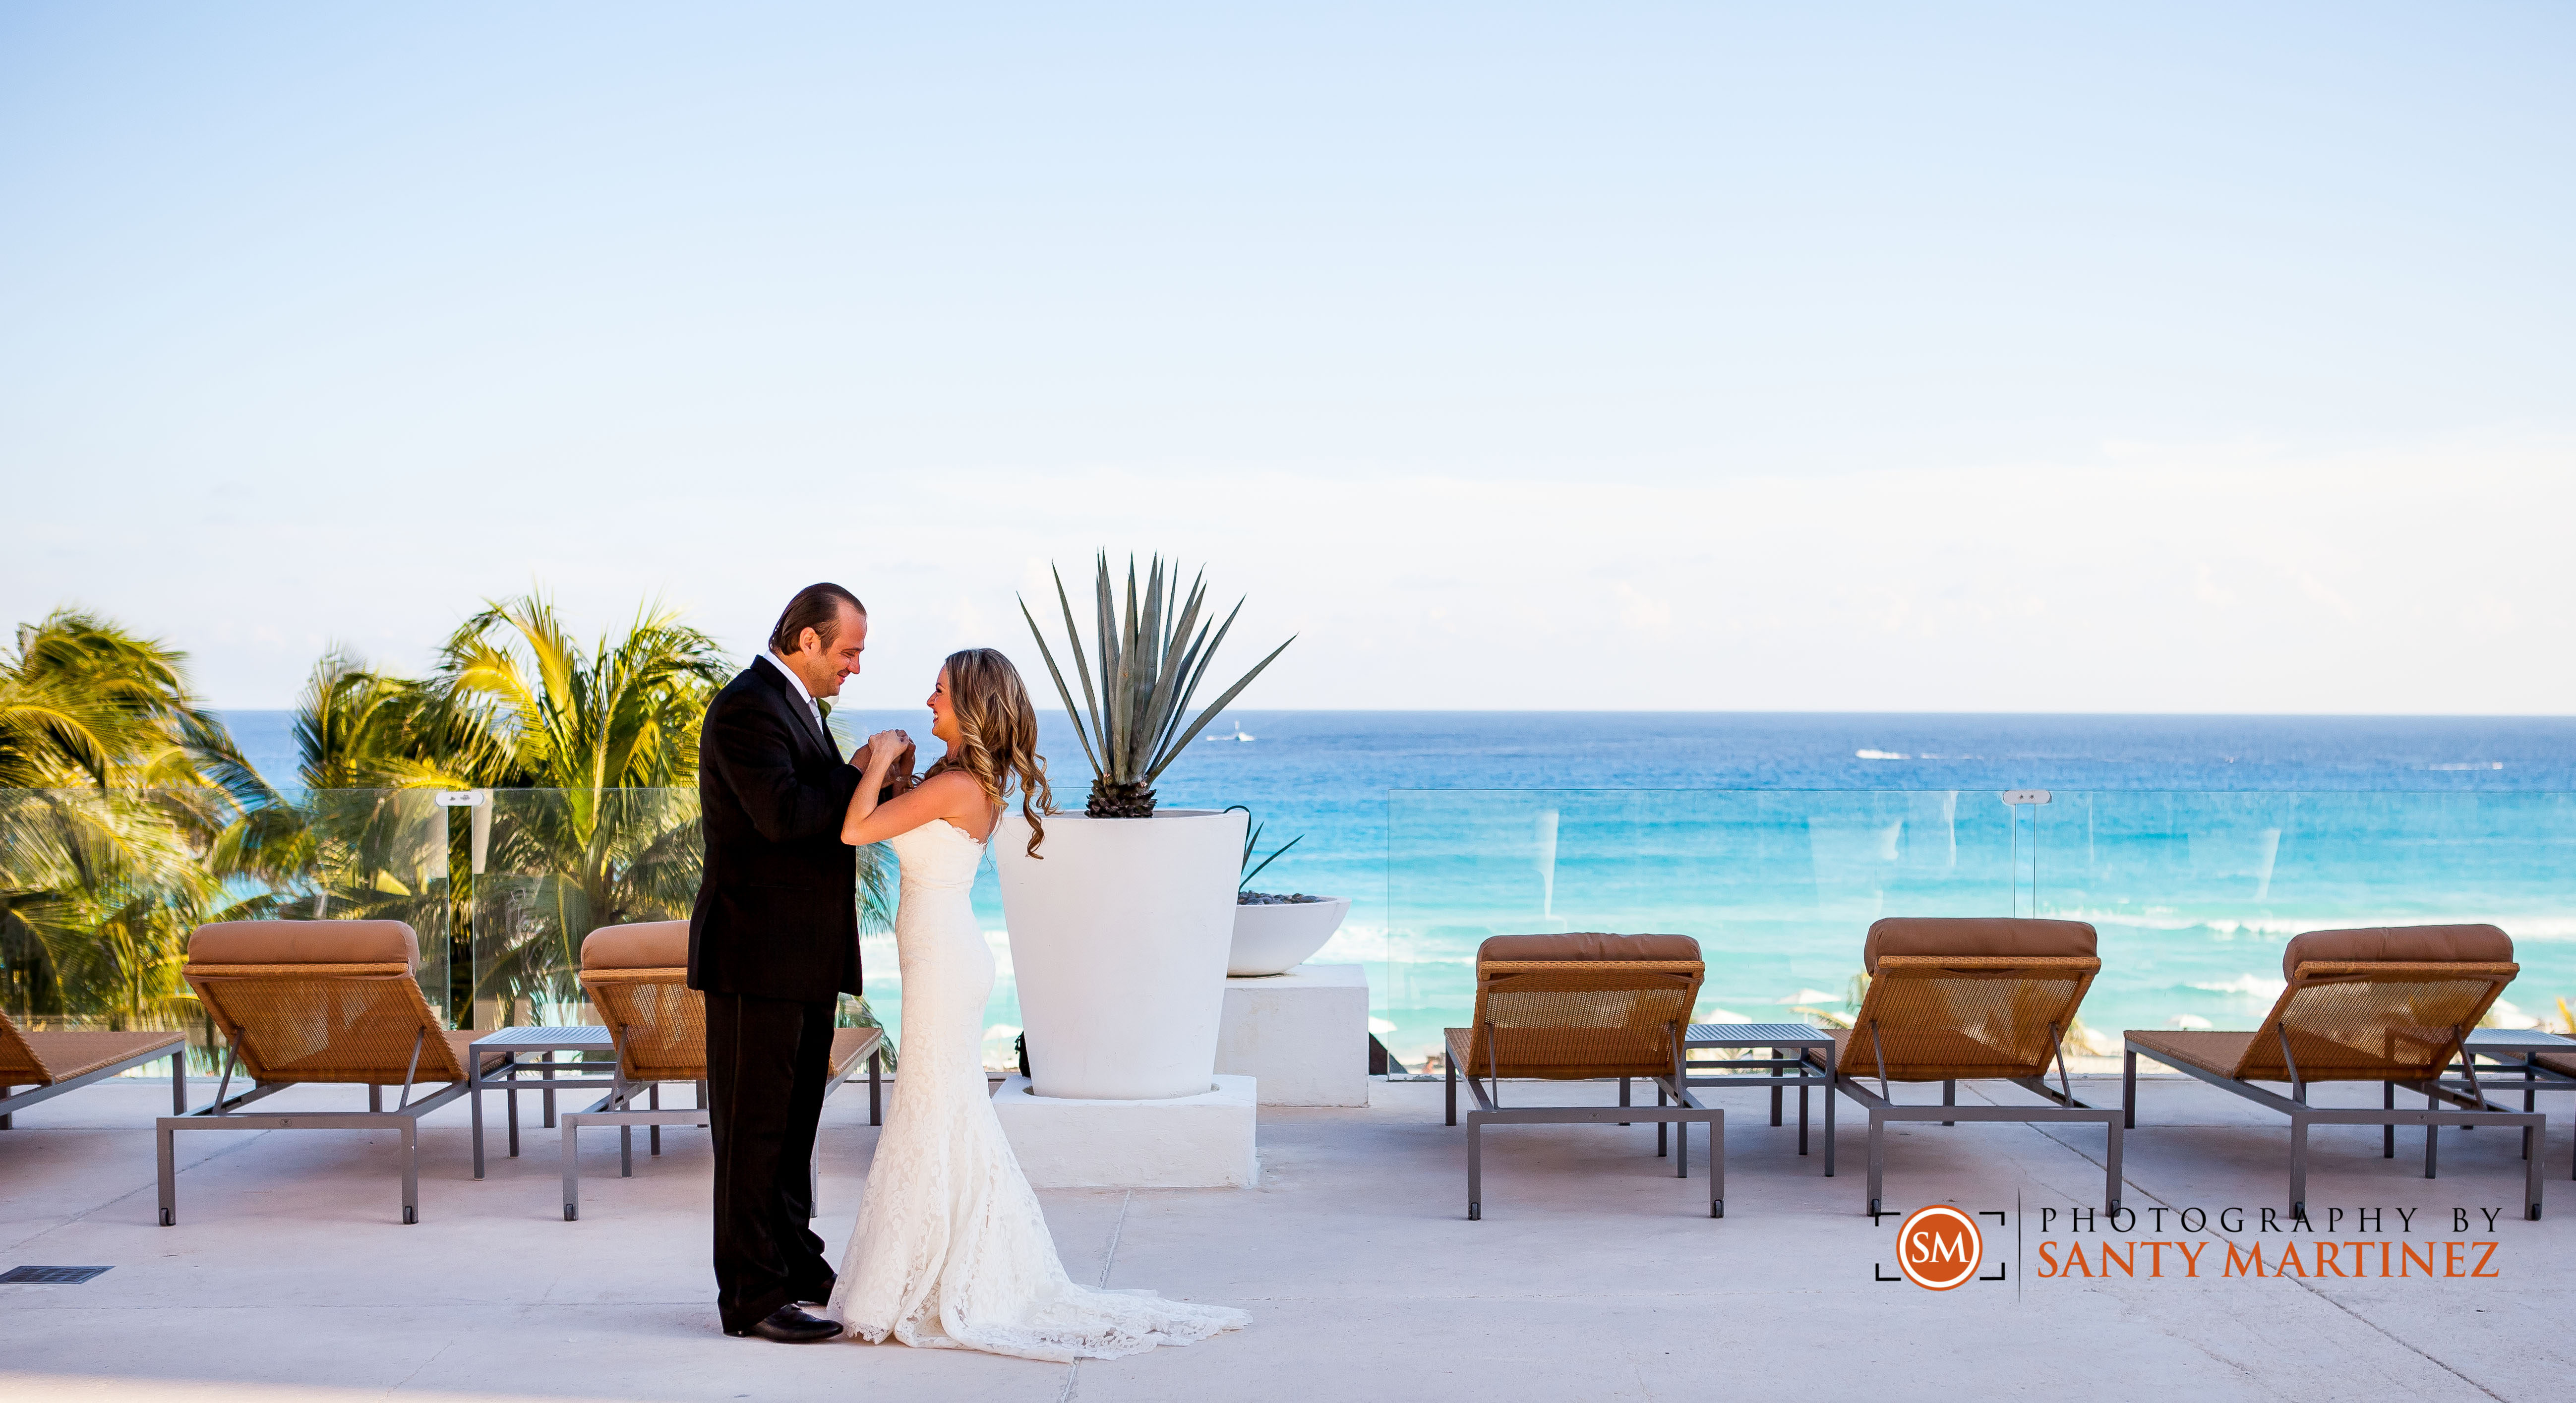 Sneak Peek: Wedding at Le Blanc Resort and Spa in Cancun, Mexico ...